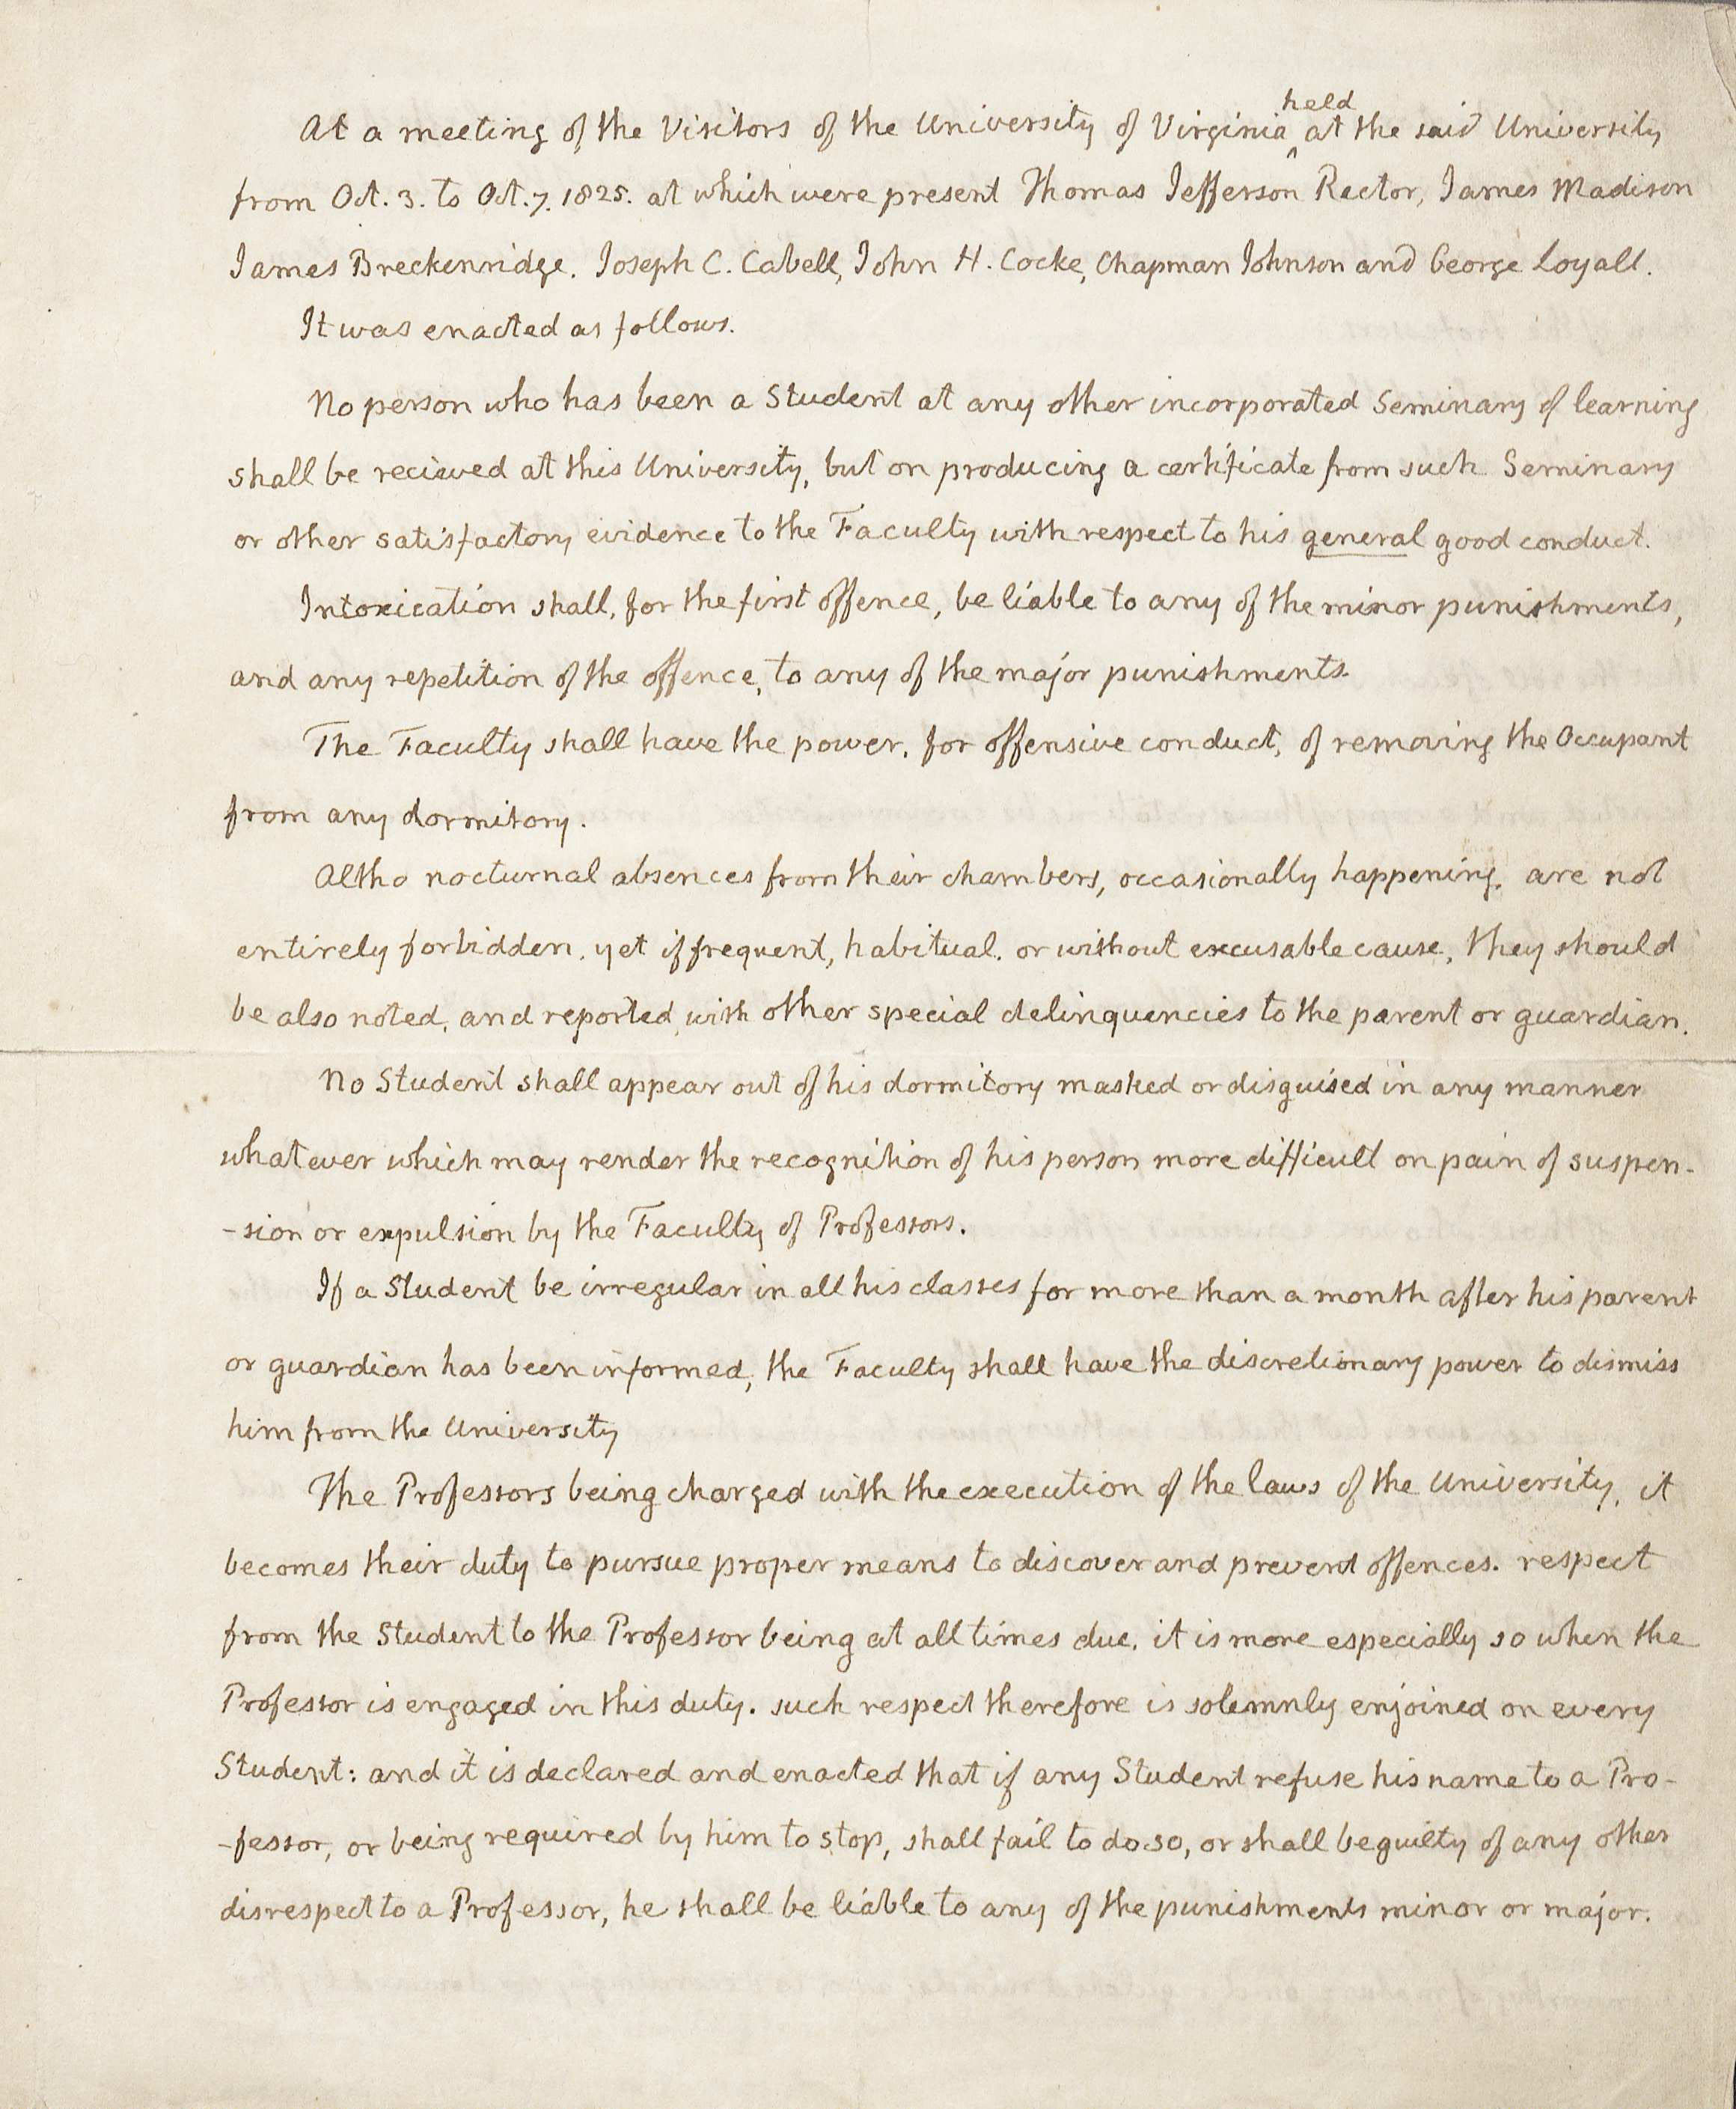 Regulations of the University, in the Hand of and Signed by Thomas Jefferson, Rector, 3-7 October 1825 (MSS 10300) This manuscript, written by Thomas Jefferson, defines all of the rules of the University of Virginia.  In these rules, Mr. Jefferson places a lot of power in the hands of the Professors and charges them “with the execution of the laws of the University.”  He gives them the responsibility of disciplining students for actions committed outside of the classroom in places like the dormitories. 